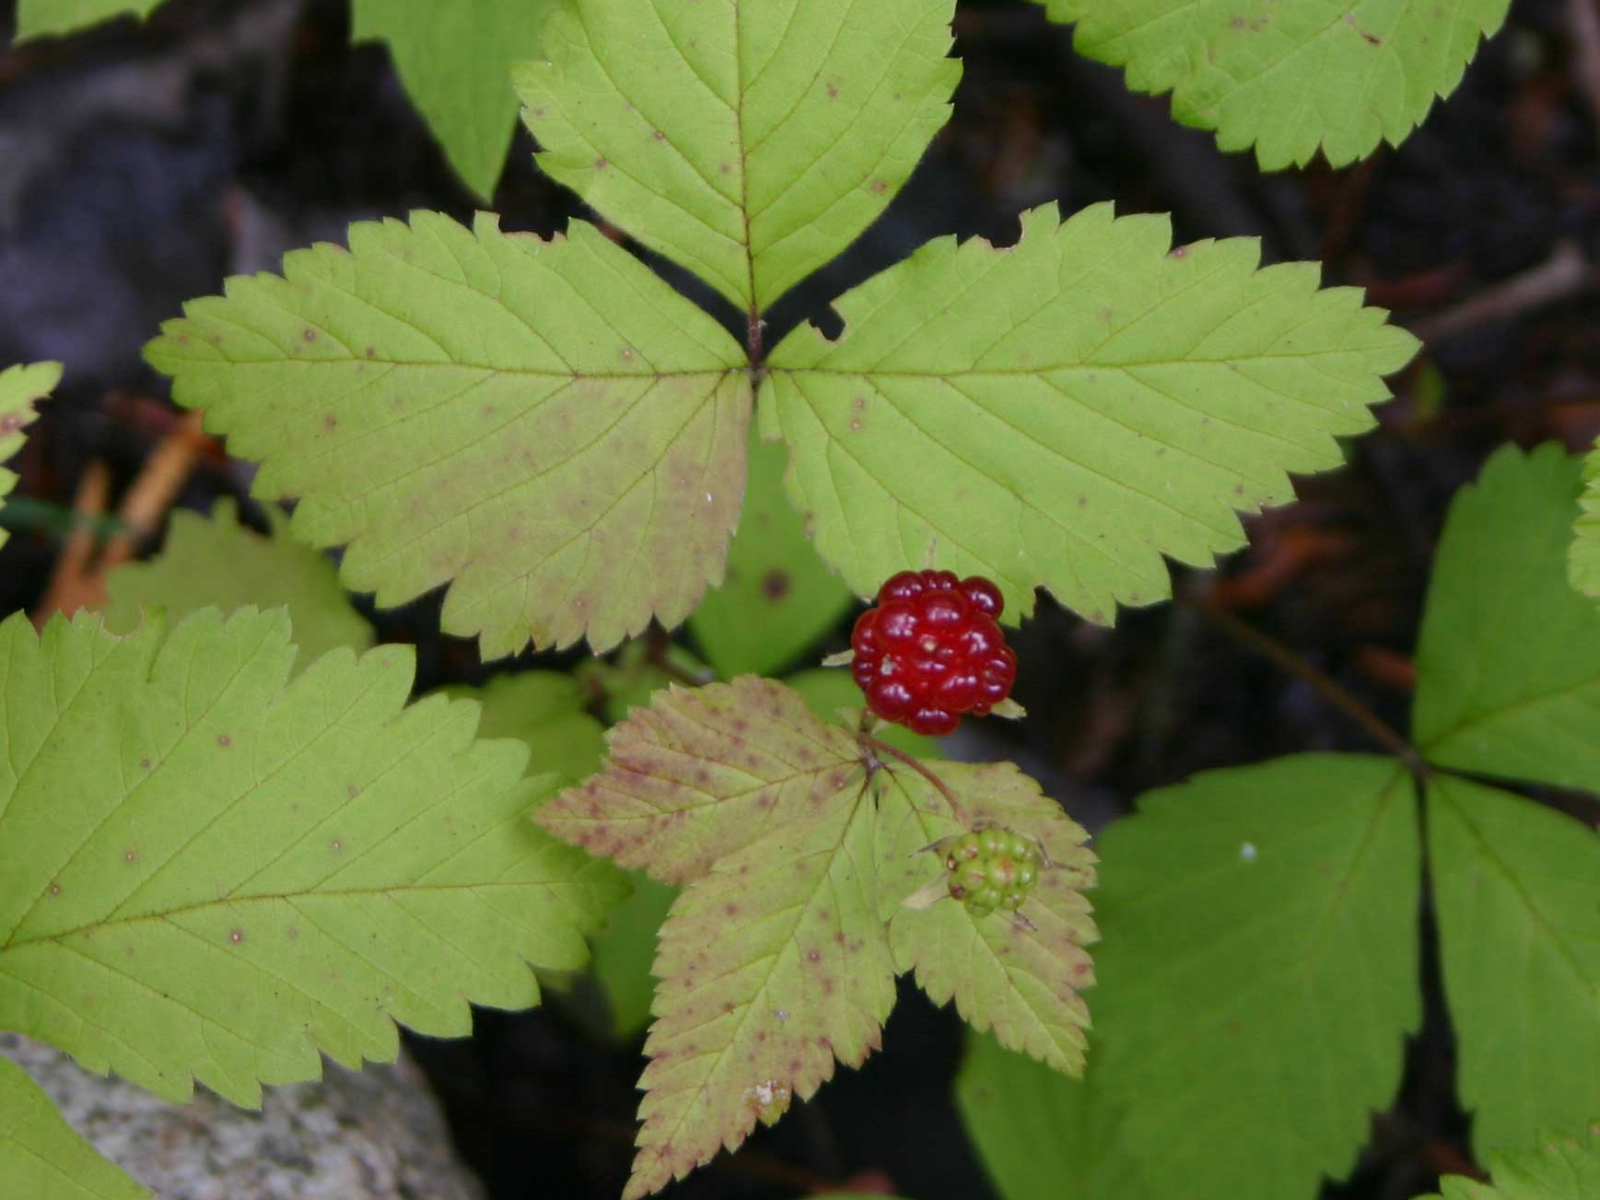 A deep red raspberry peeking out from green leaves.